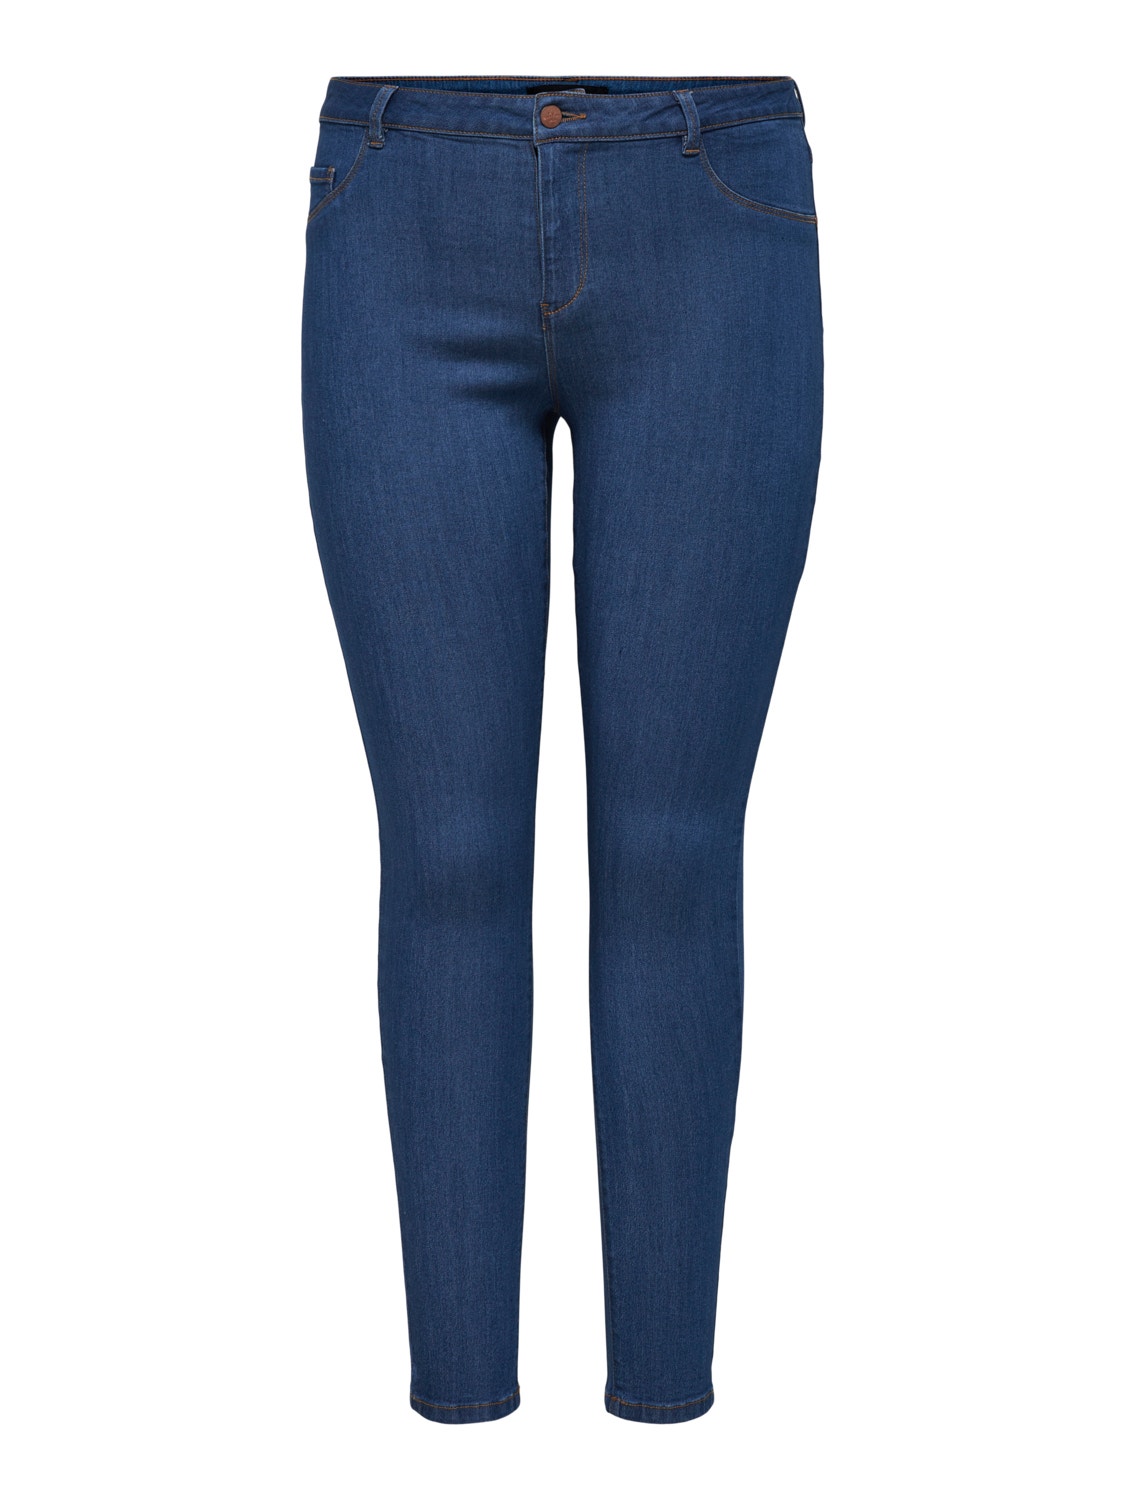 ONLY Jeans Skinny Fit Taille classique -Medium Blue Denim - 15254261